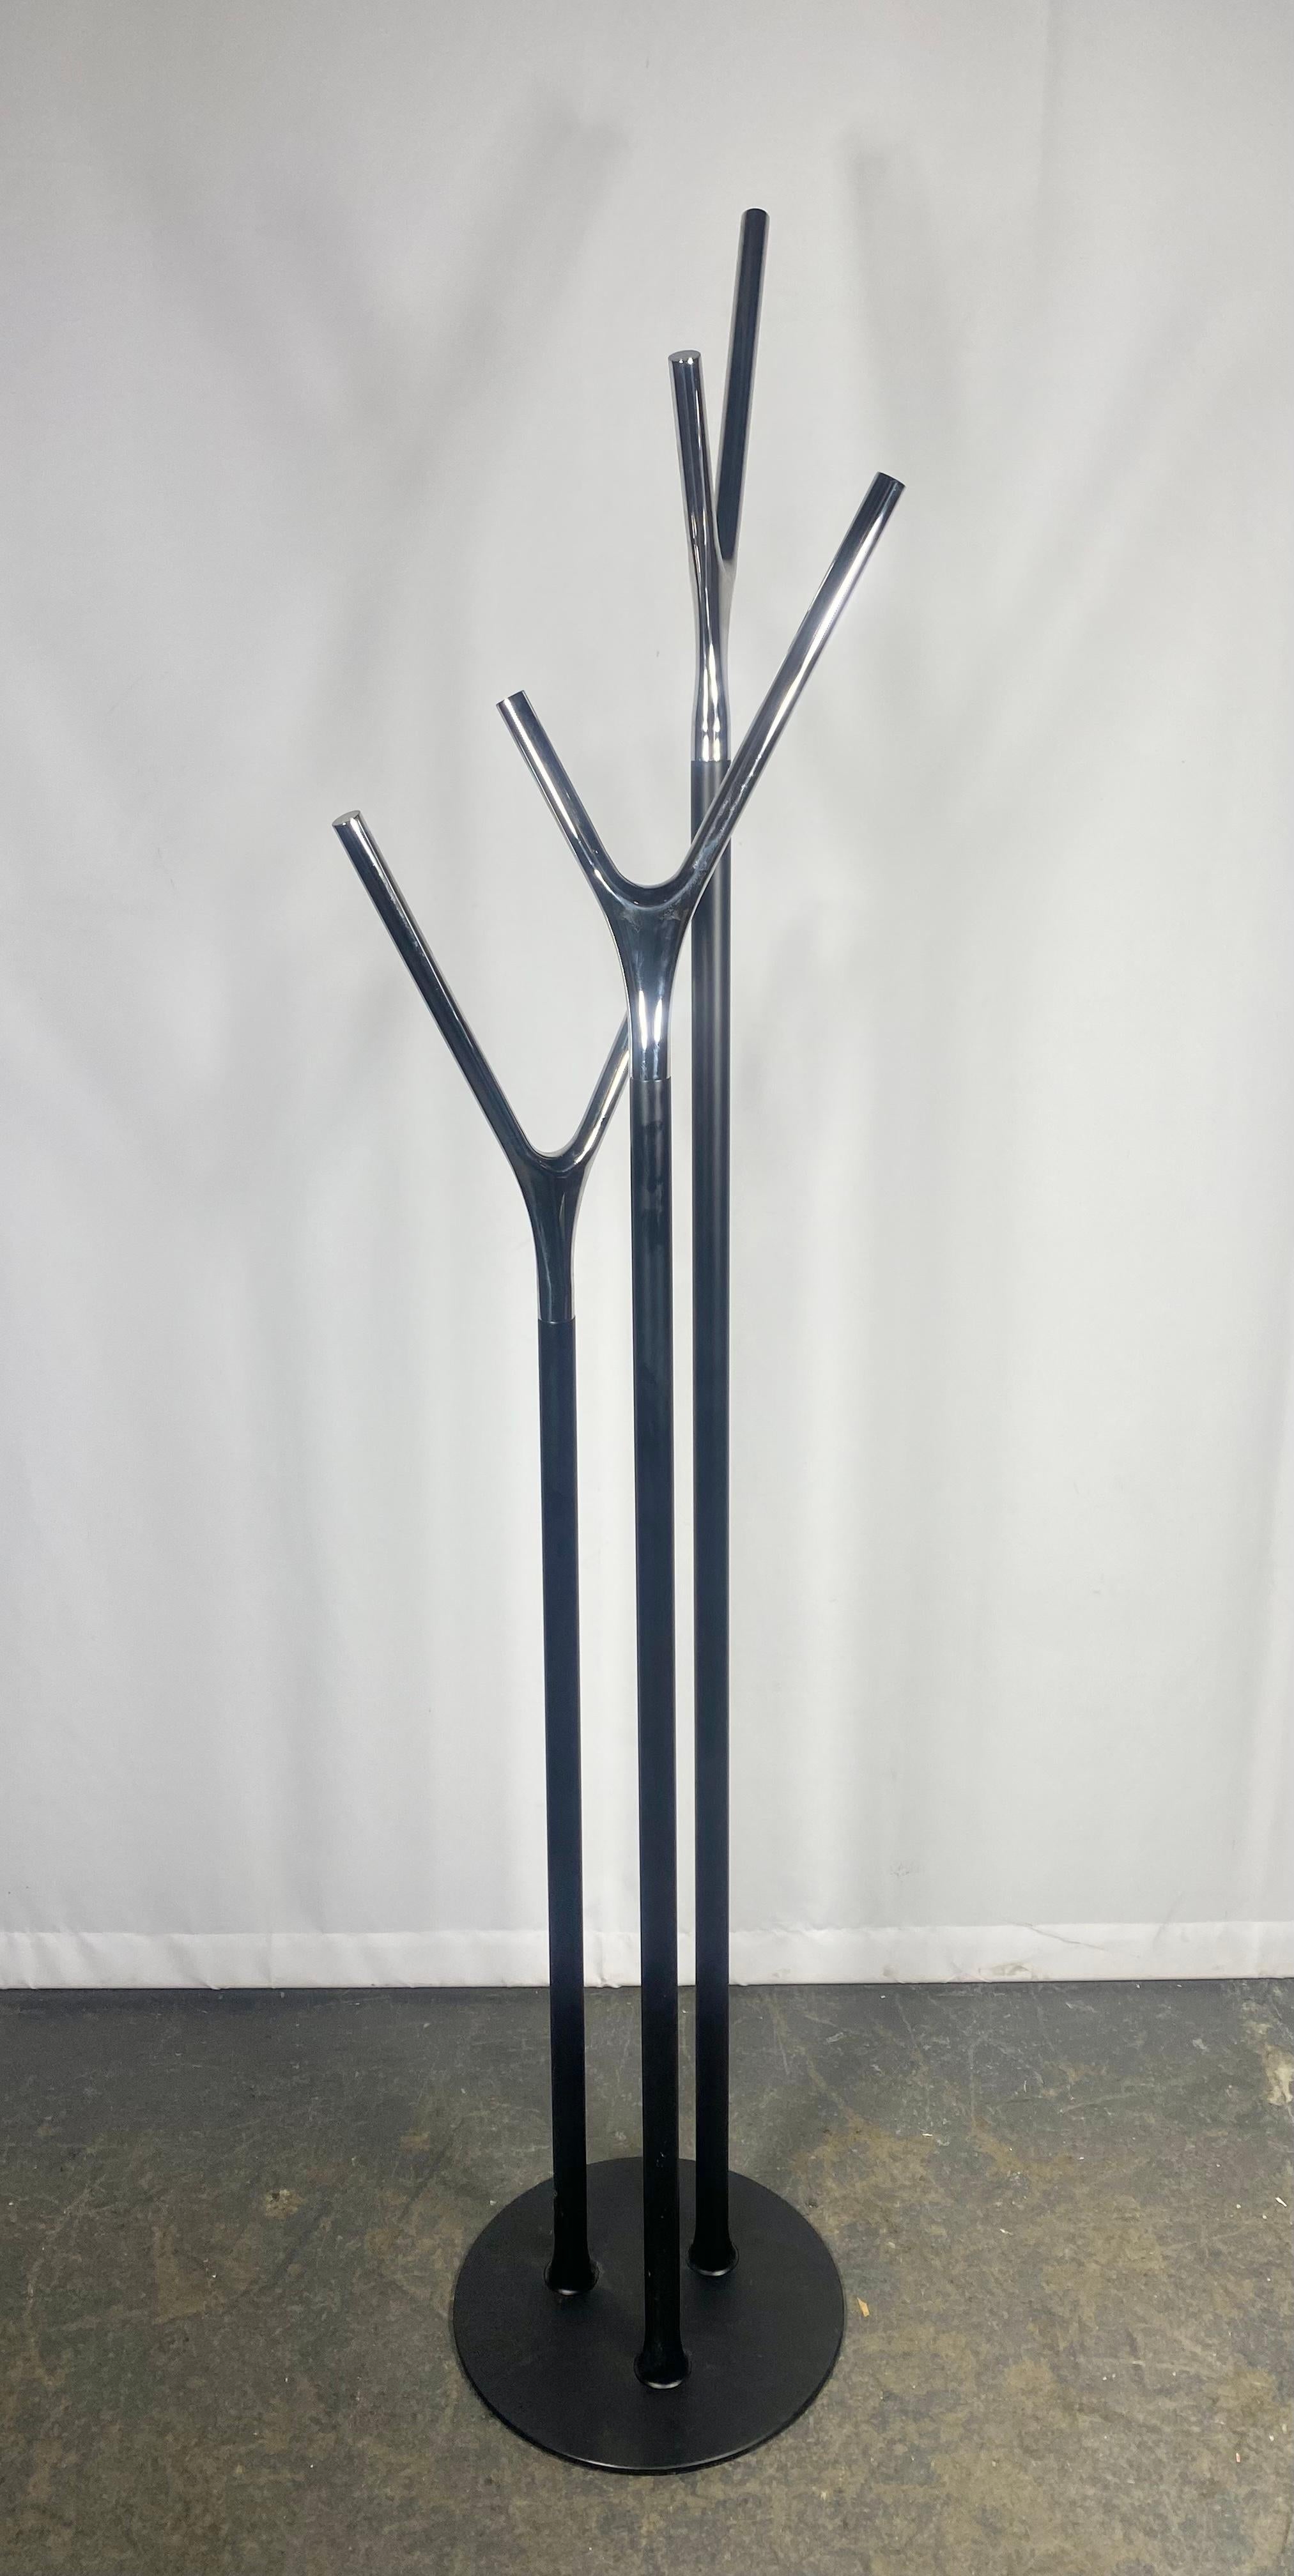 Cold-Painted Modernist Contemporary Wishbone Coat Stand - Mirror Chrome by Busk+Hertzog For Sale